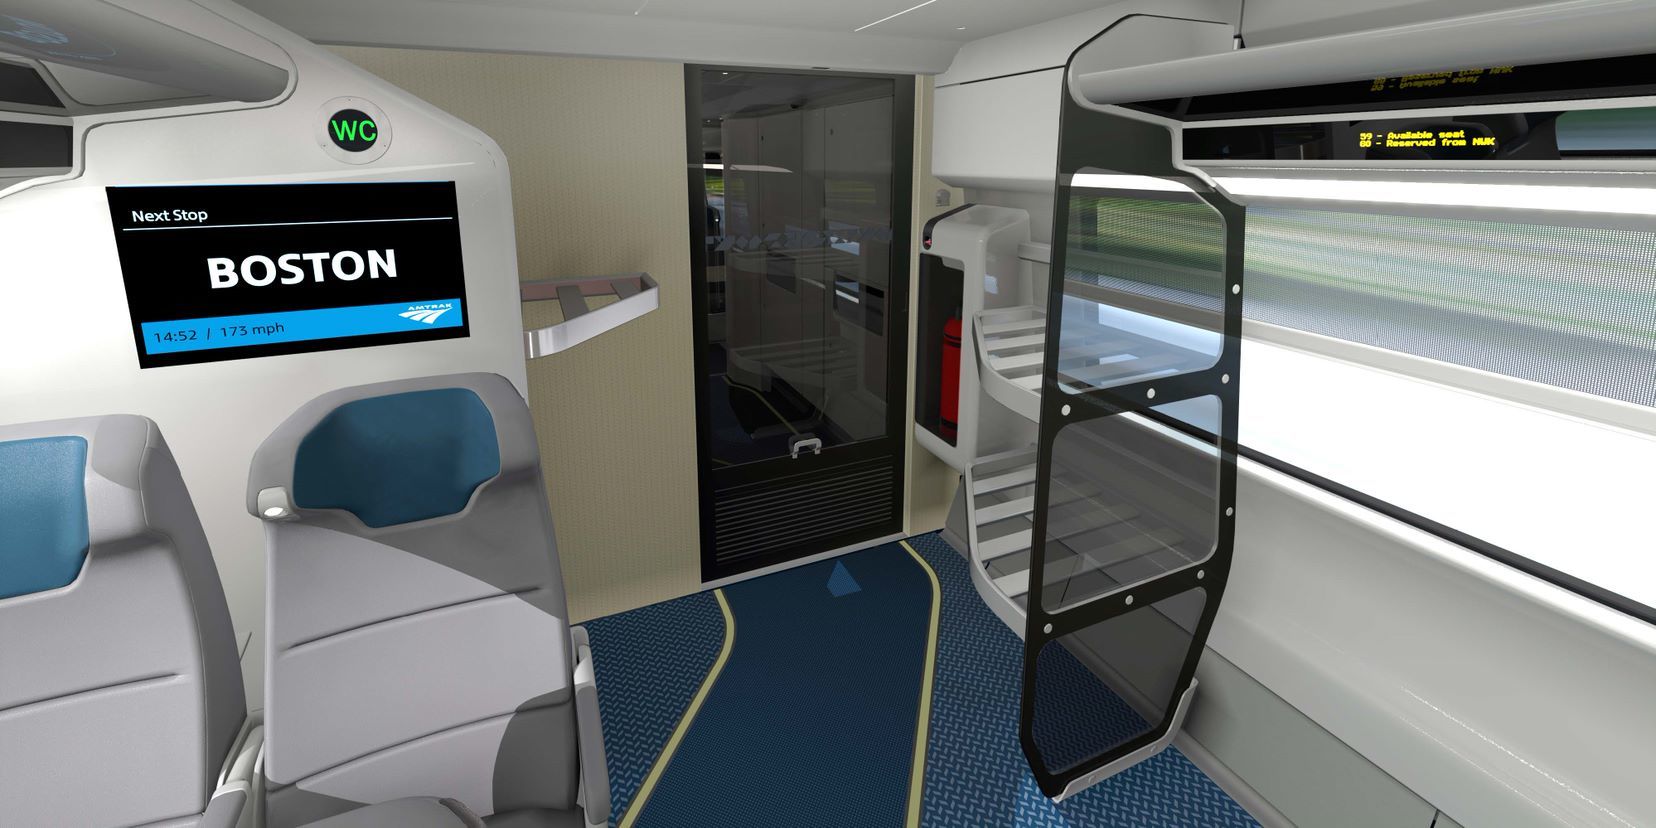 The new trainsets will include Wi-Fi, an advanced seat reservation system, and LED screens in each train car that will provide real time information. (Courtesy Amtrak)